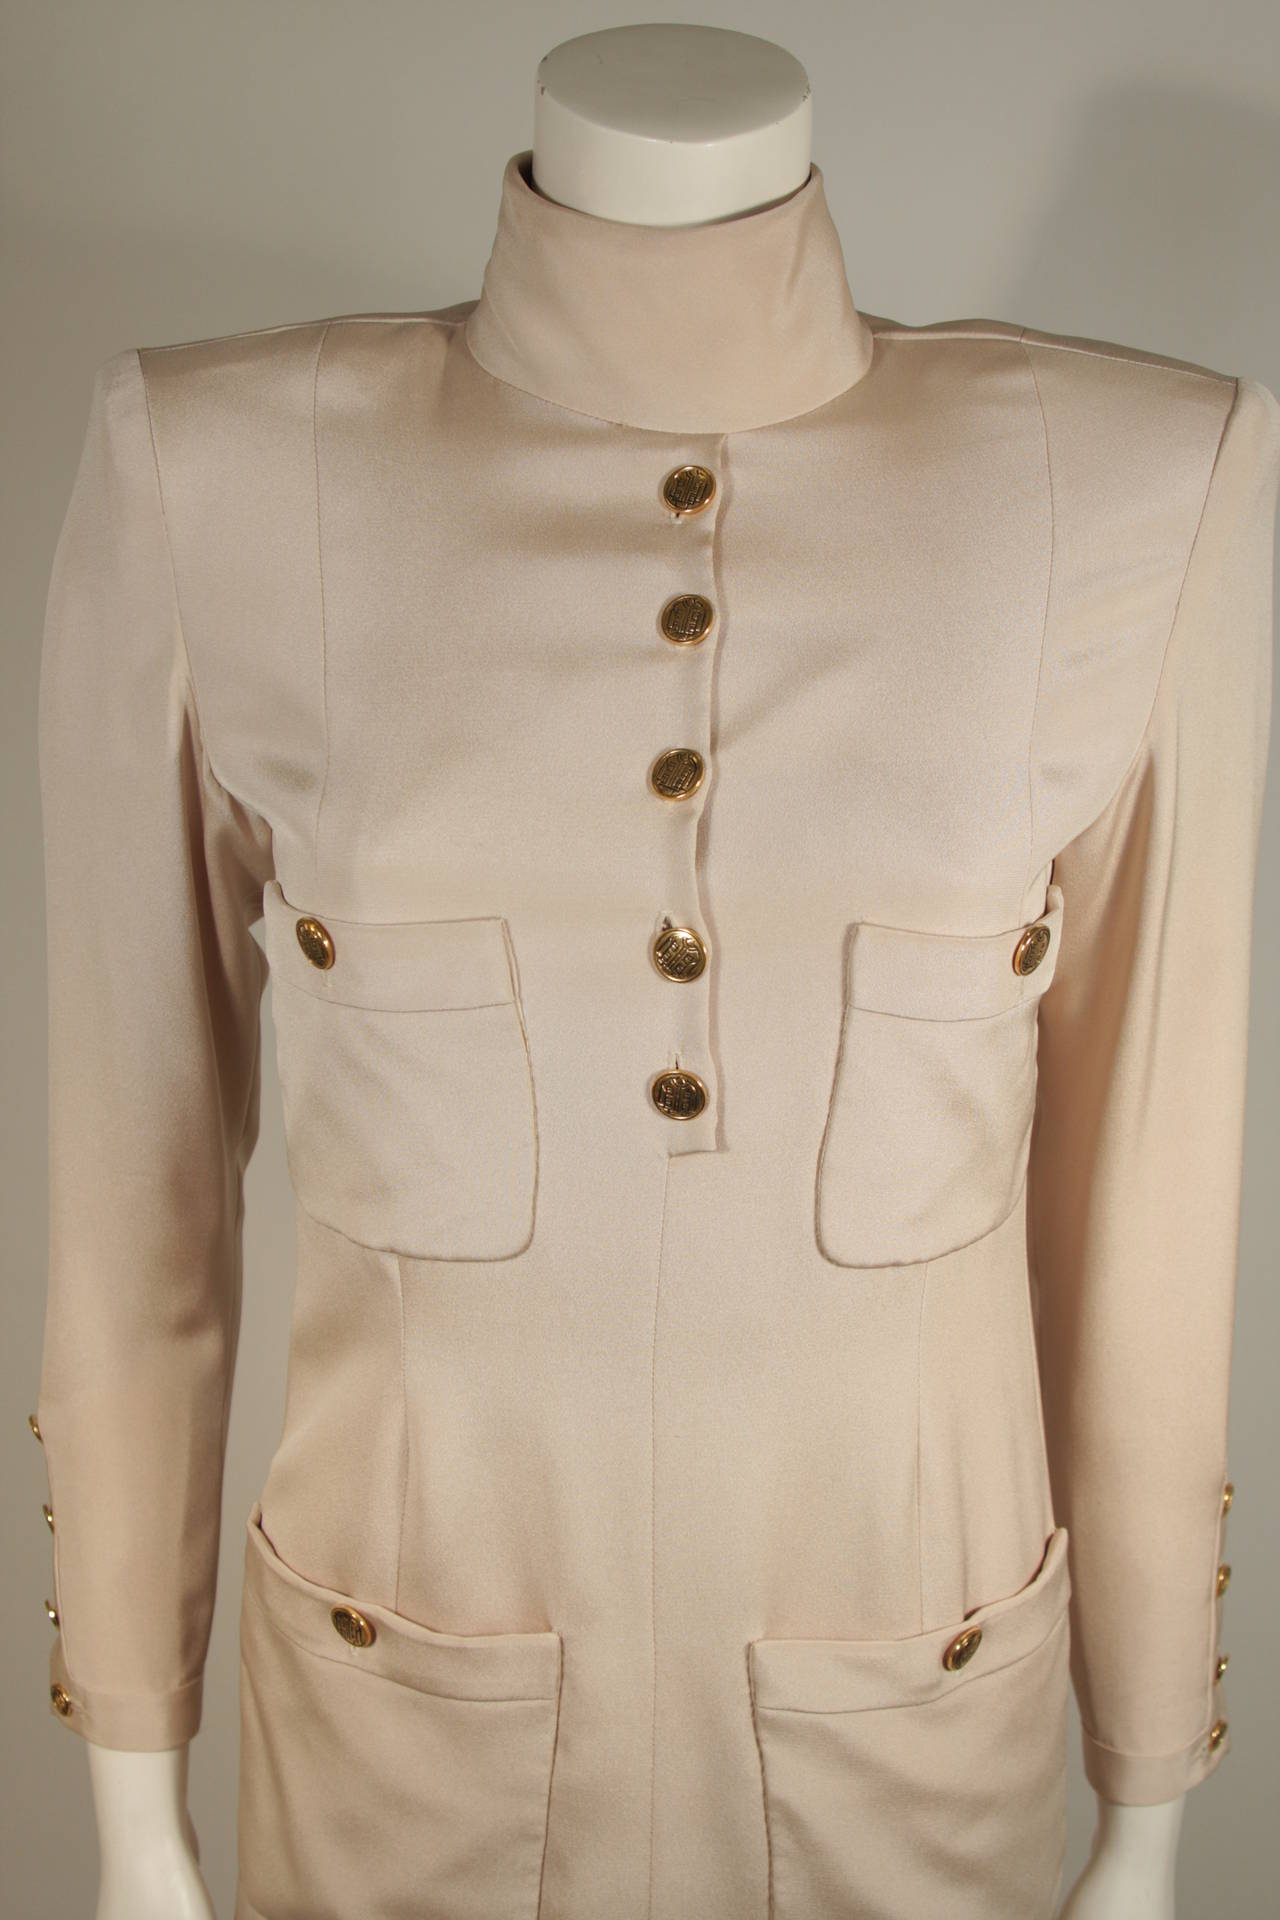 Women's 1980's Chanel Haute Couture Champagne Silk Military Inspired Dress Size 2-4